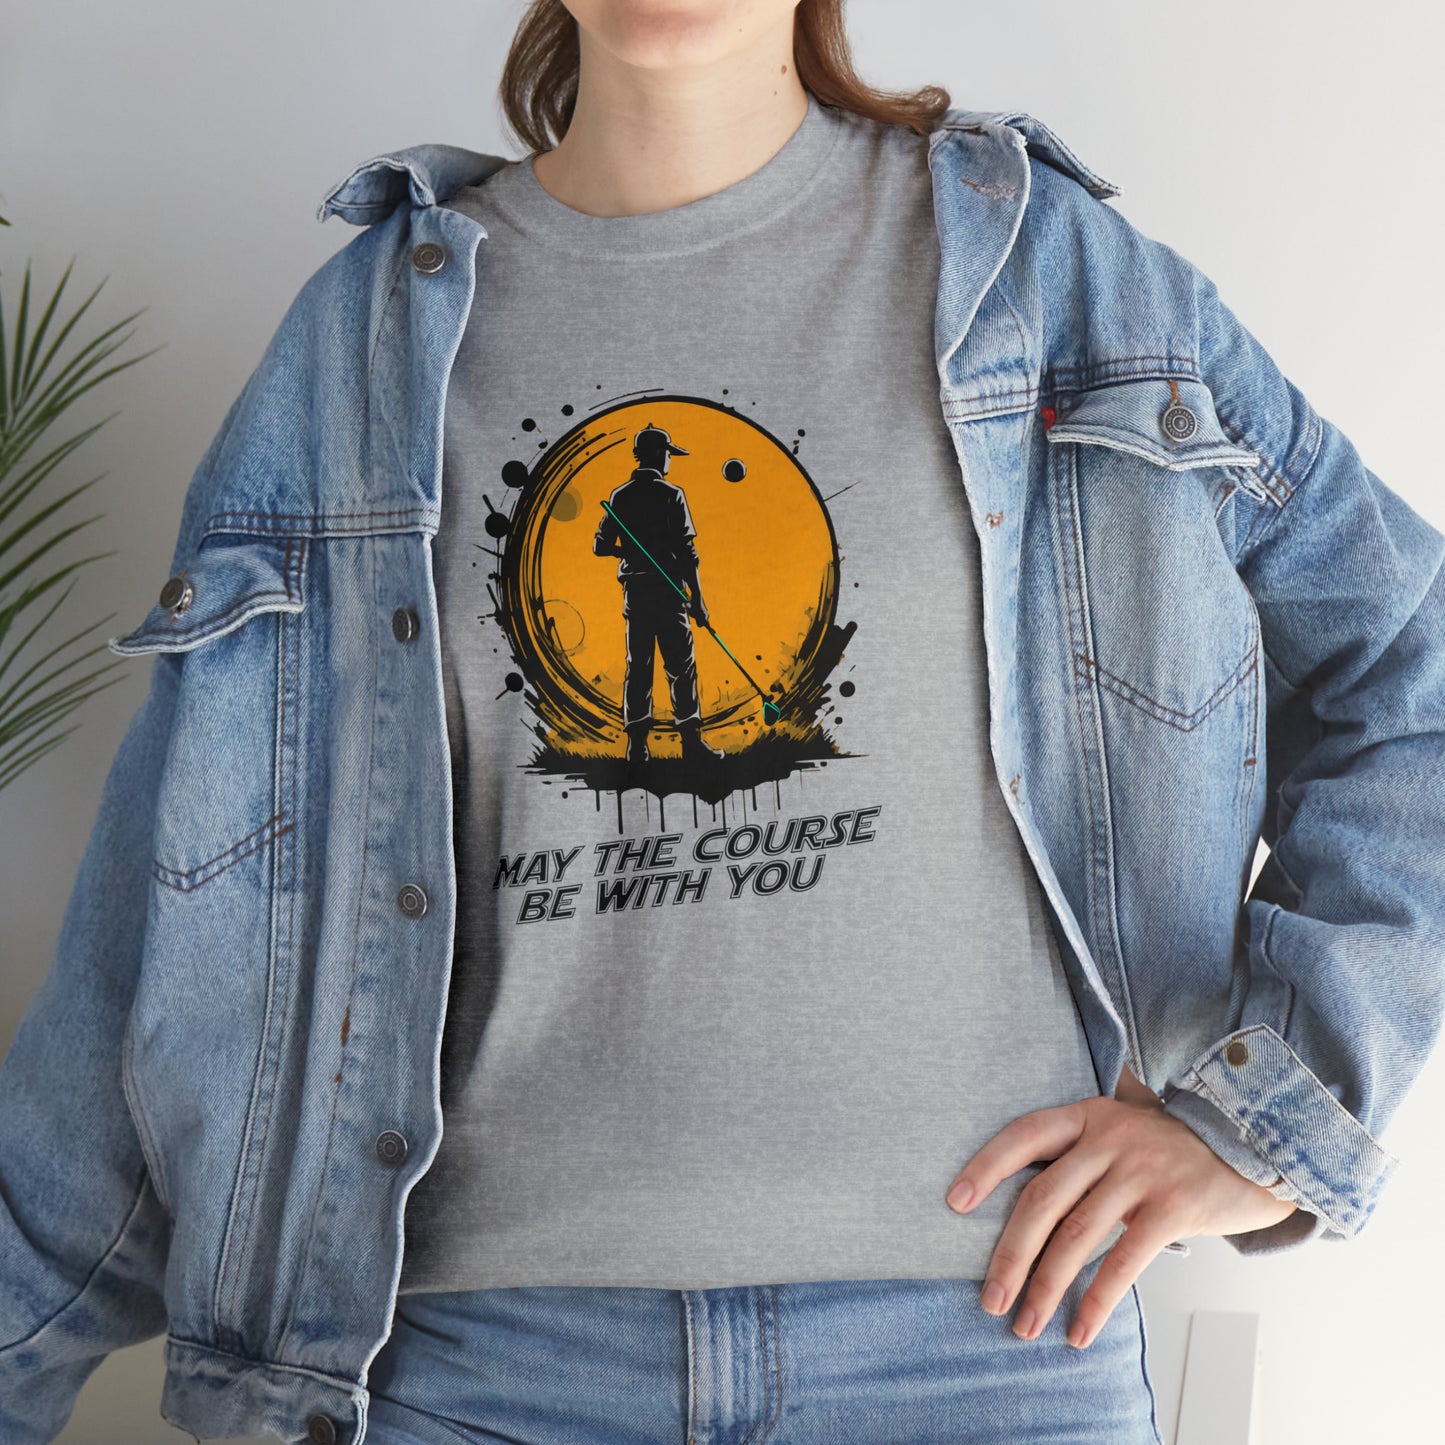 May the course be with you t-shirt